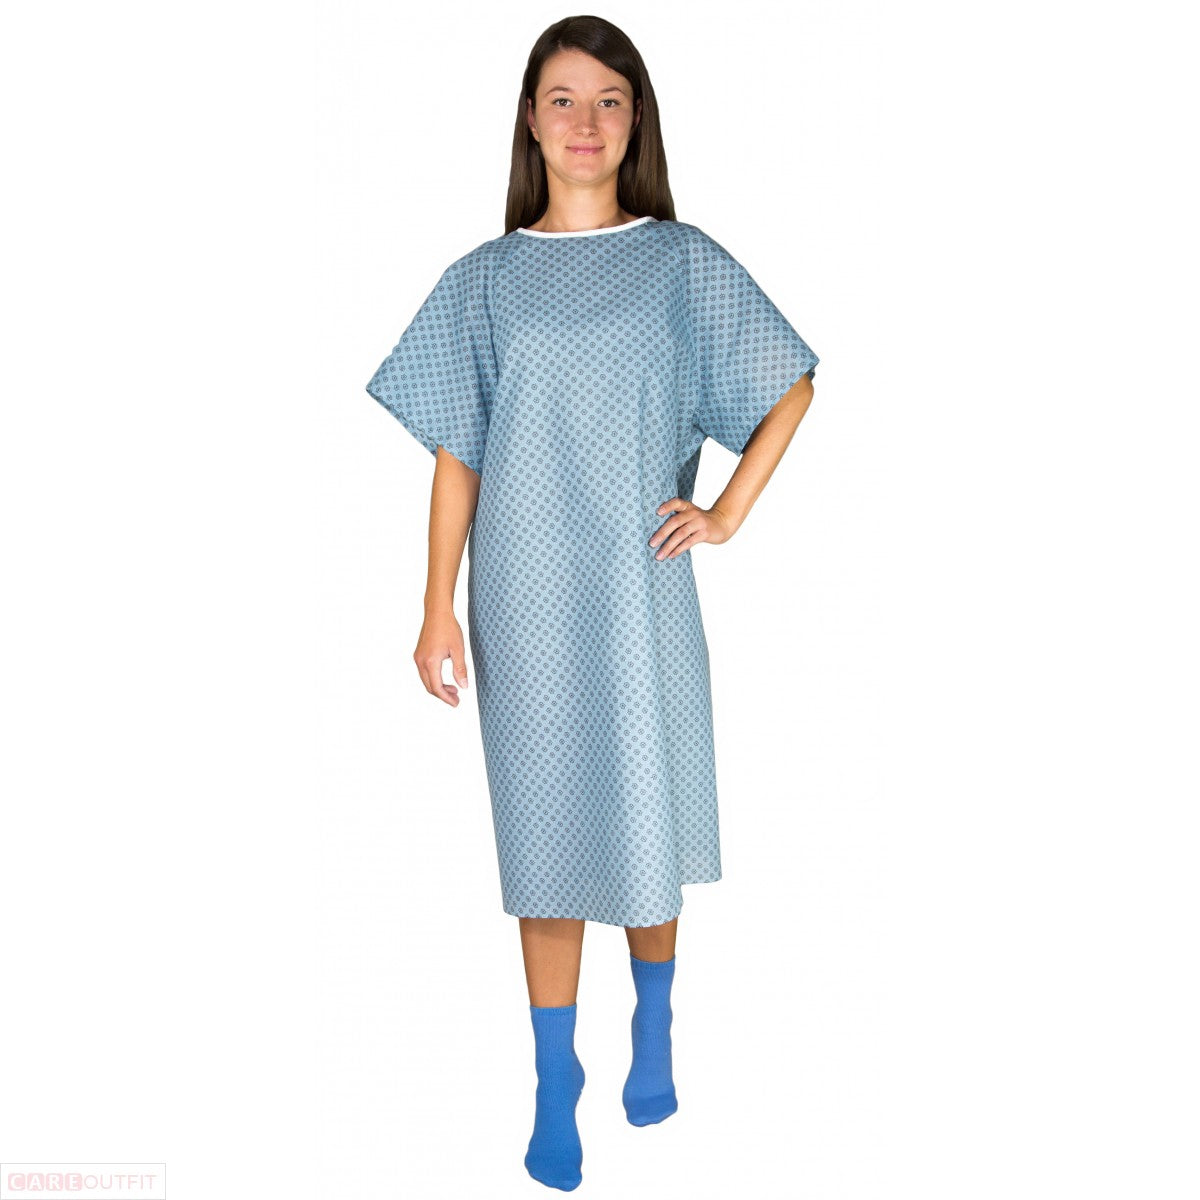 Economy Hospital Gown - Blue with Snowflake Prints – Careoutfit